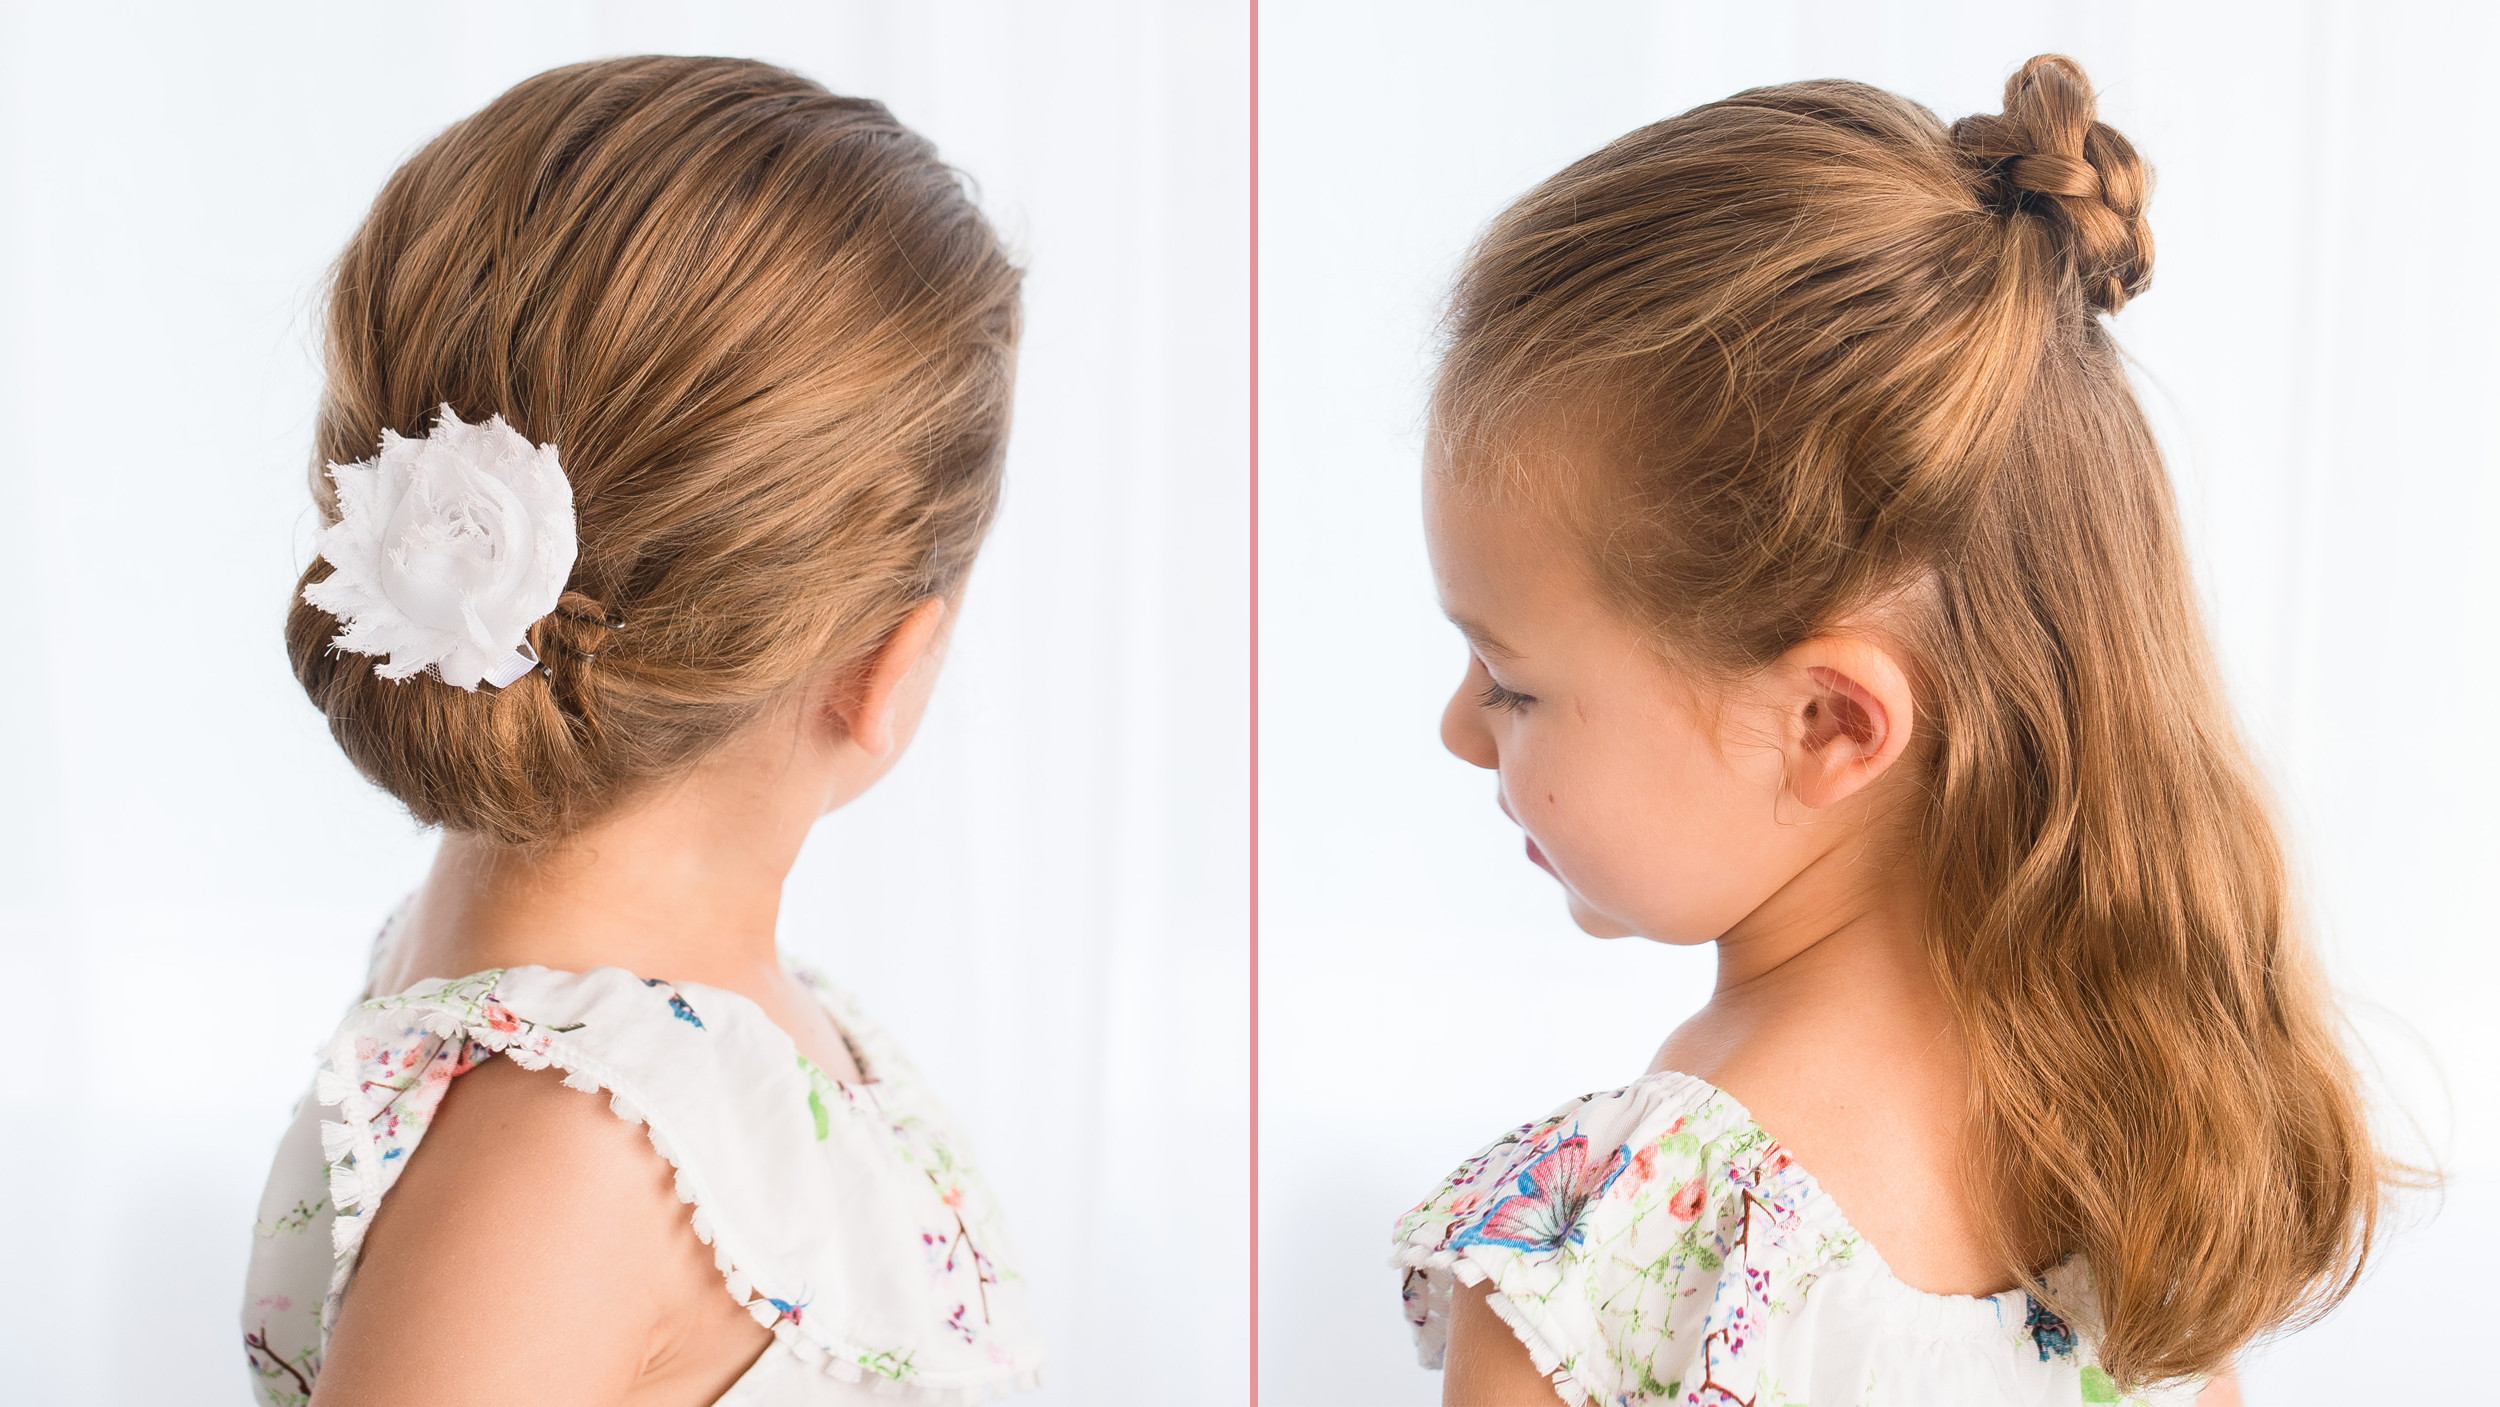 Hair Styles Kids
 Easy hairstyles for girls that you can create in minutes